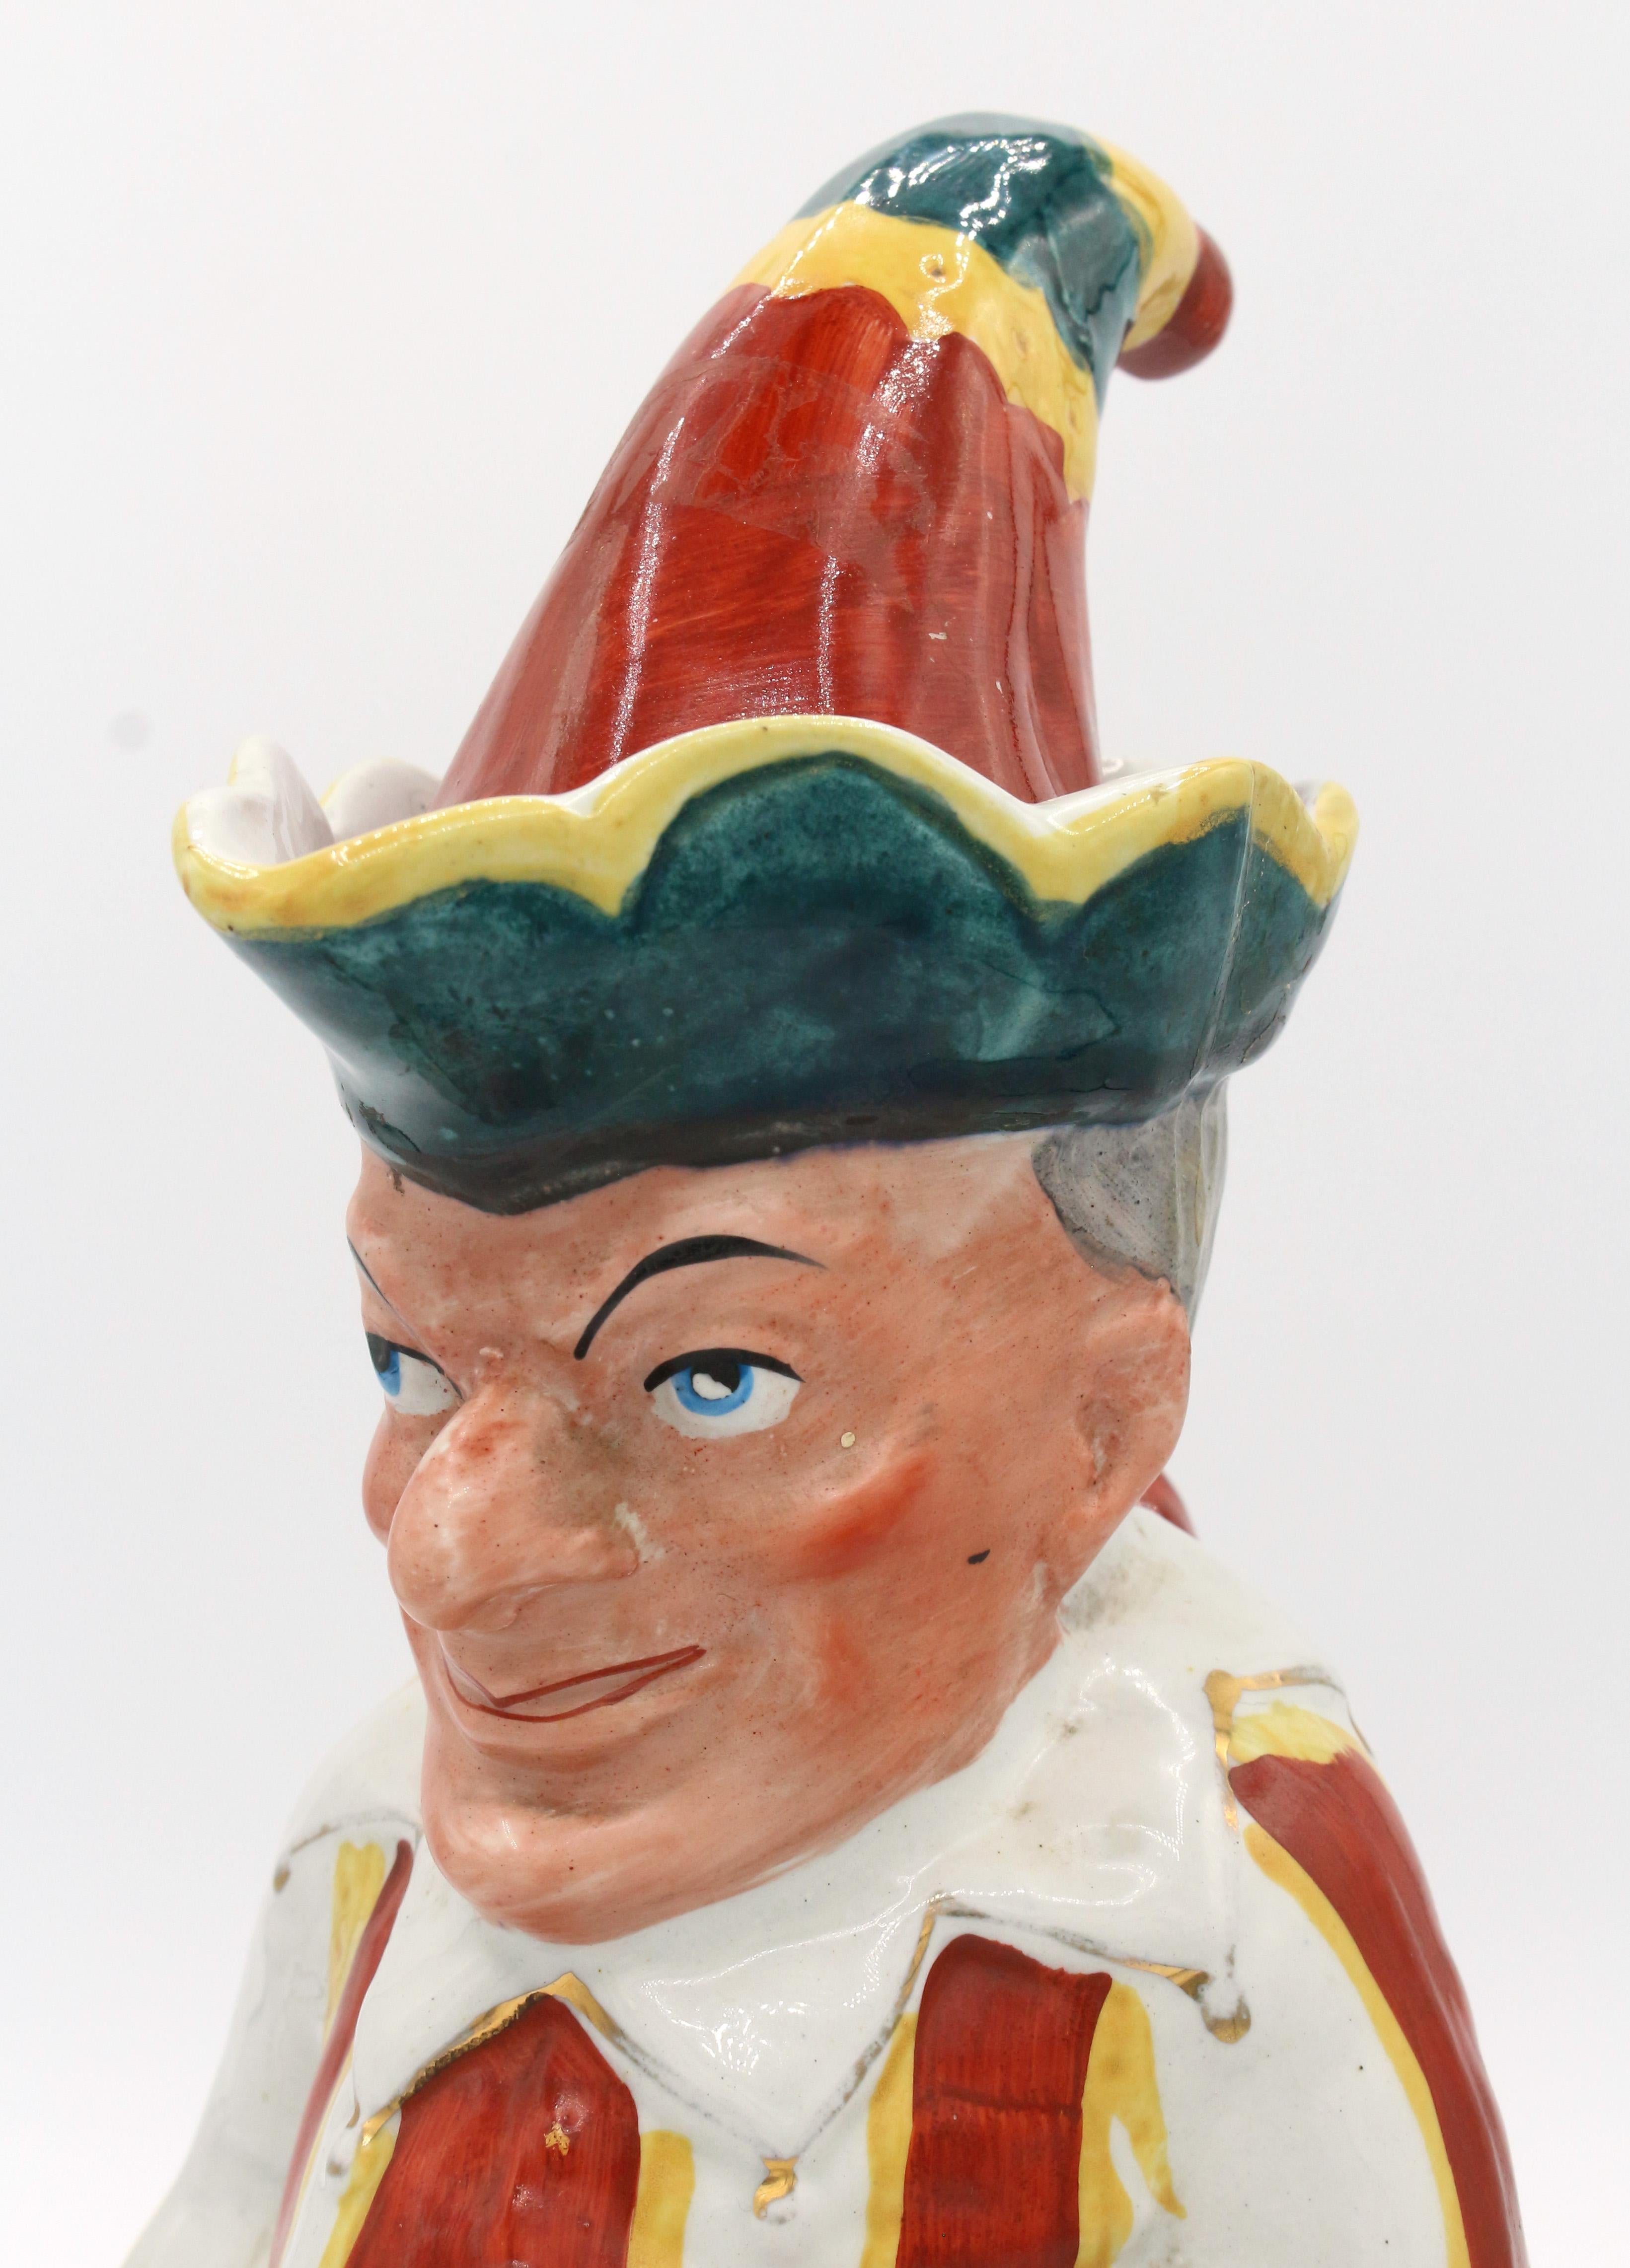 Hilarious Punch figure Toby Jug by William Machin, England, 1889-1910 For Sale 2